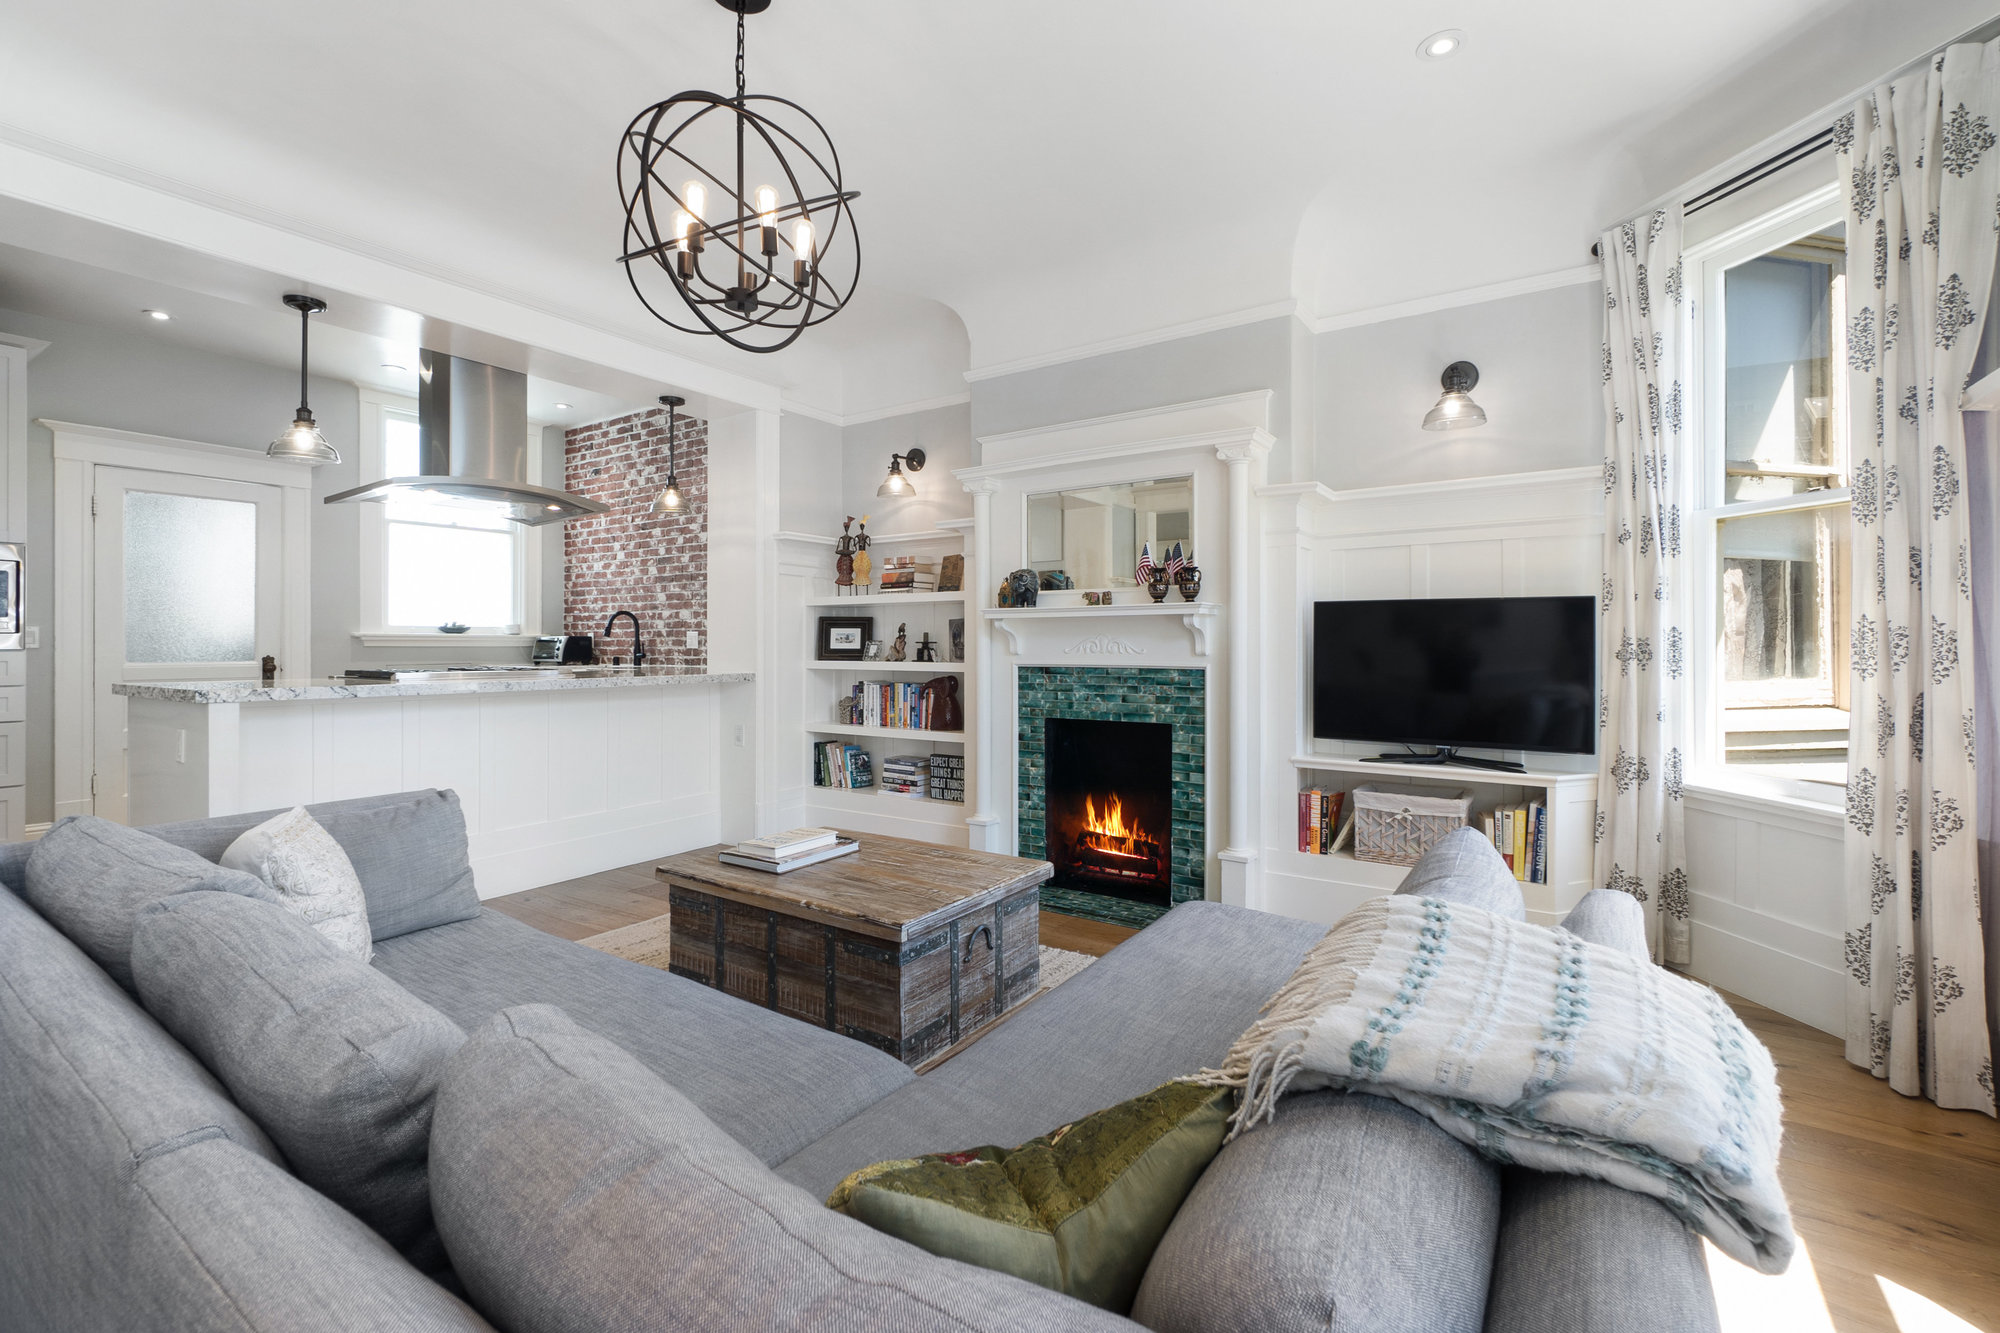 Property Photo: Living room, featuring a fireplace with large white mantle and built-in book shelves